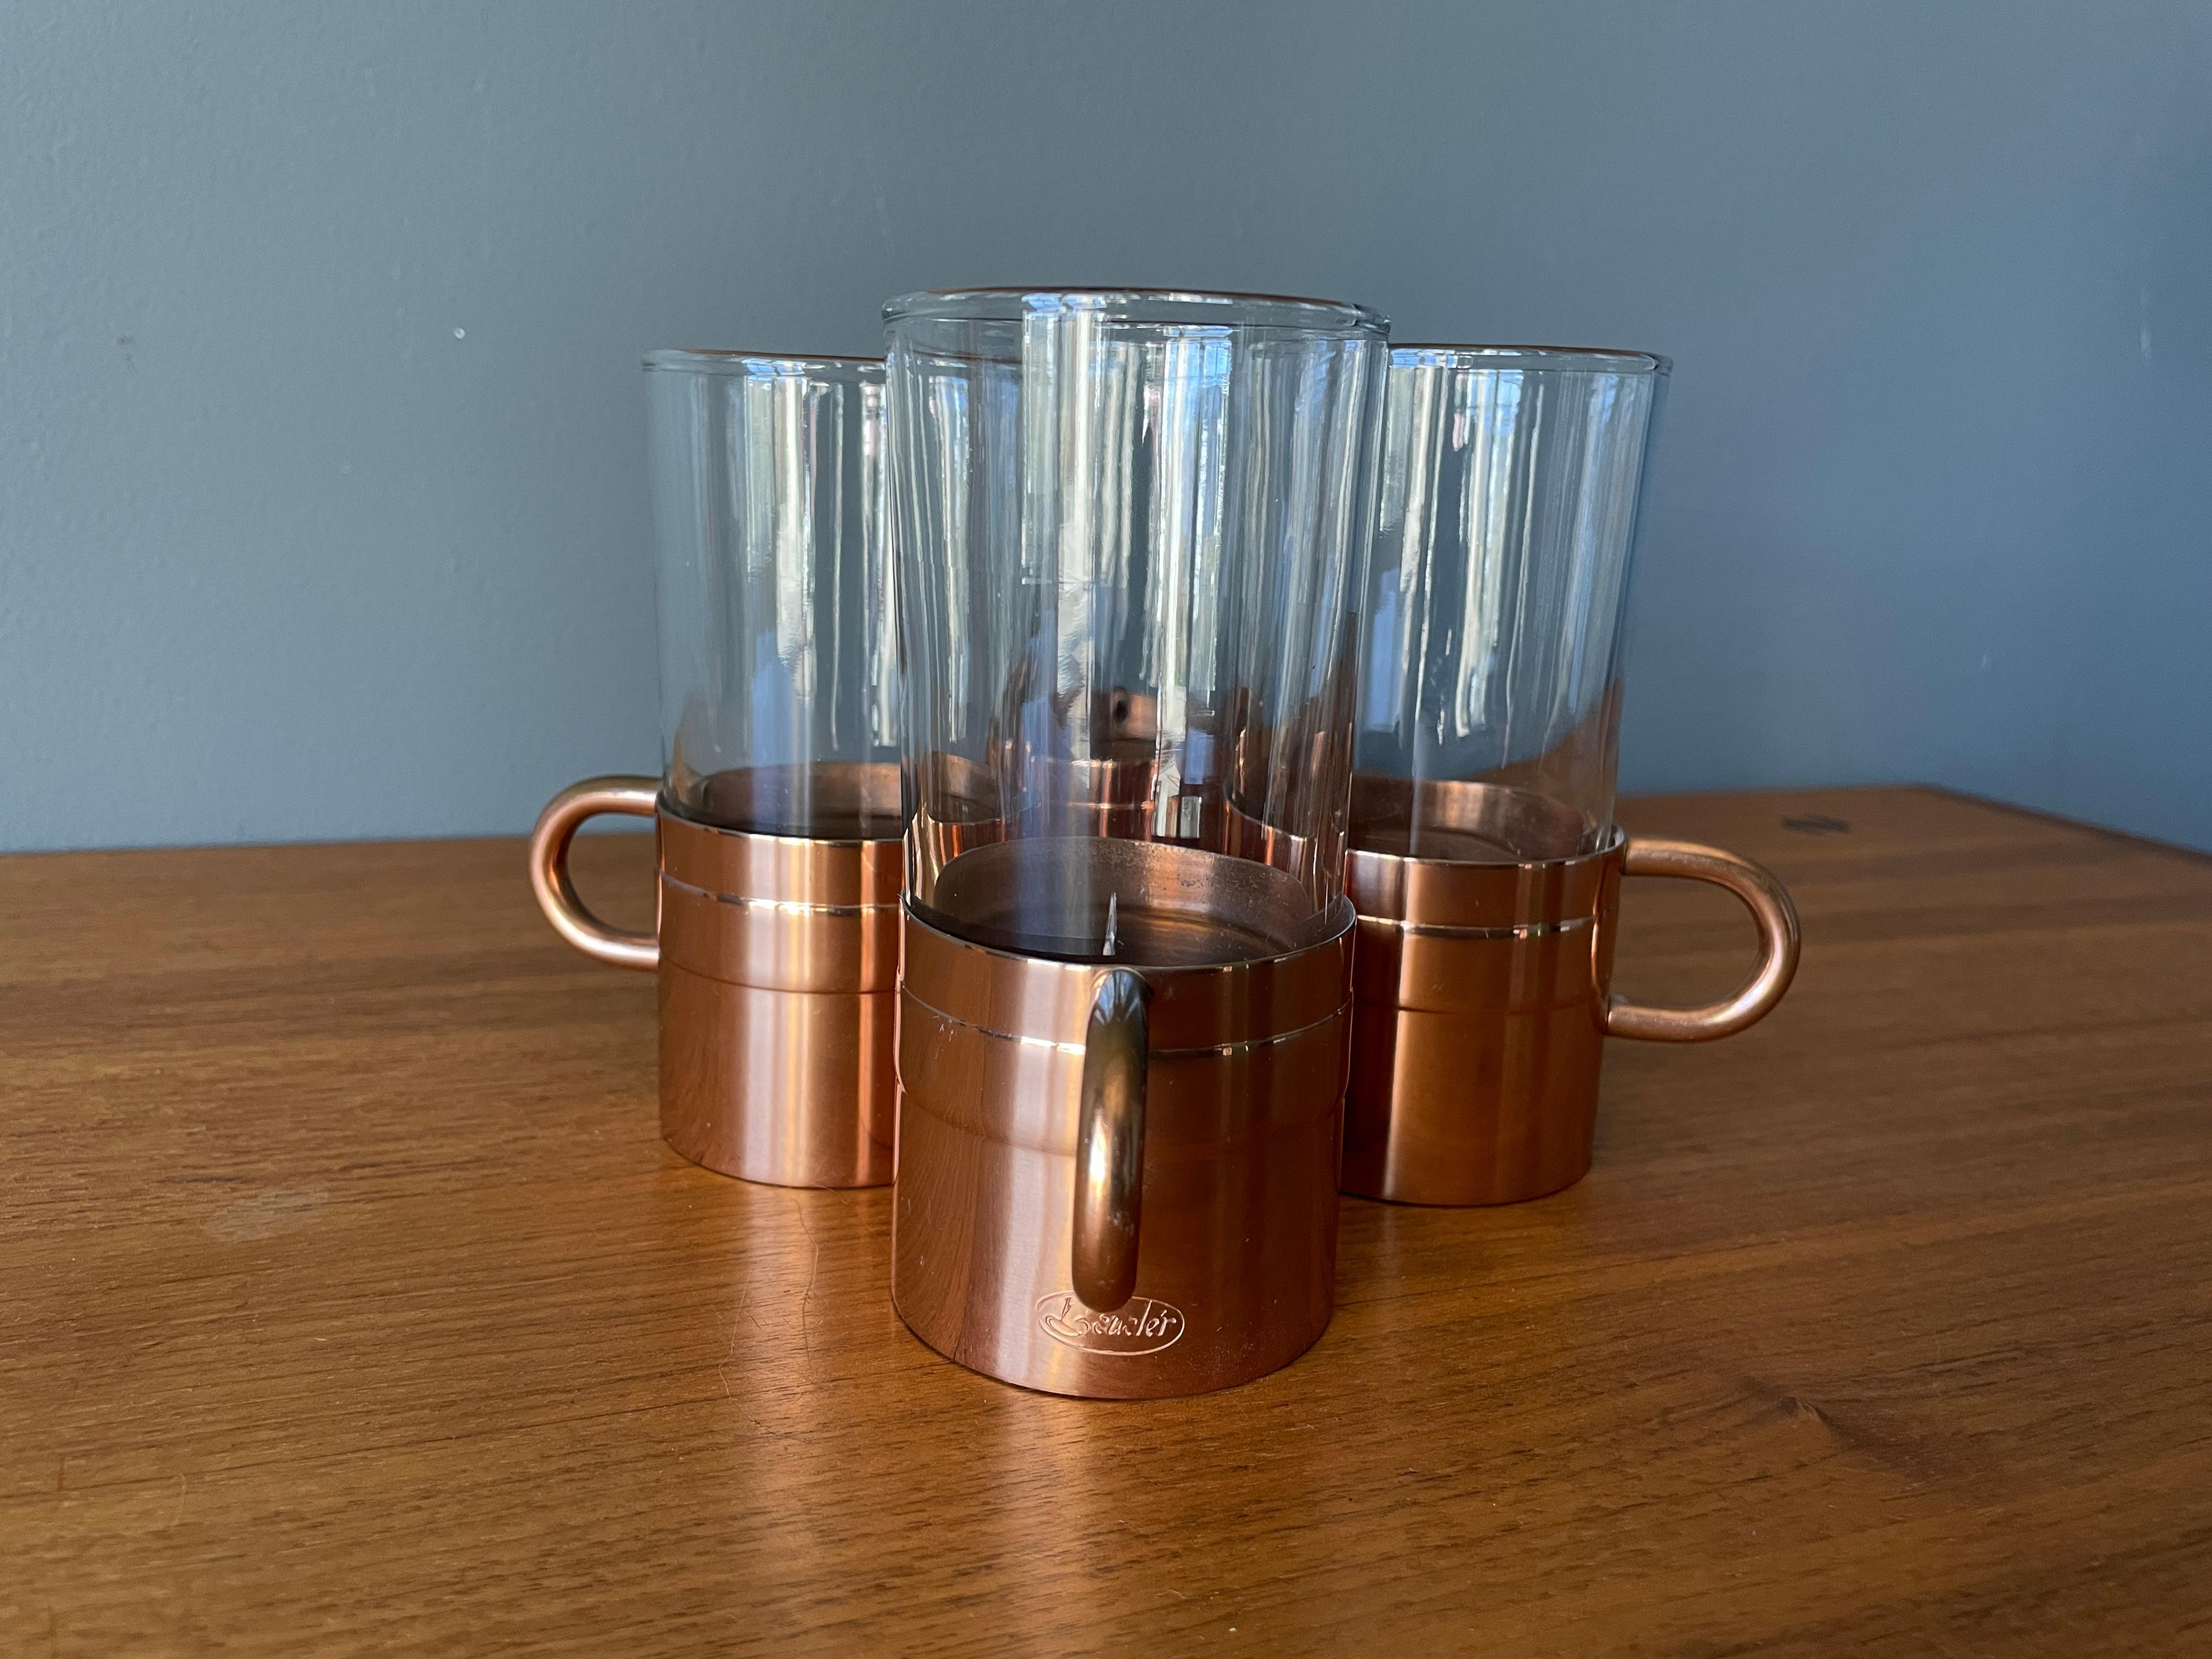 Vintage 1970s cobras by Beucler glass and copper brass mug cups. Sleek and simple design. Glass insert is removable from copper outer handle.